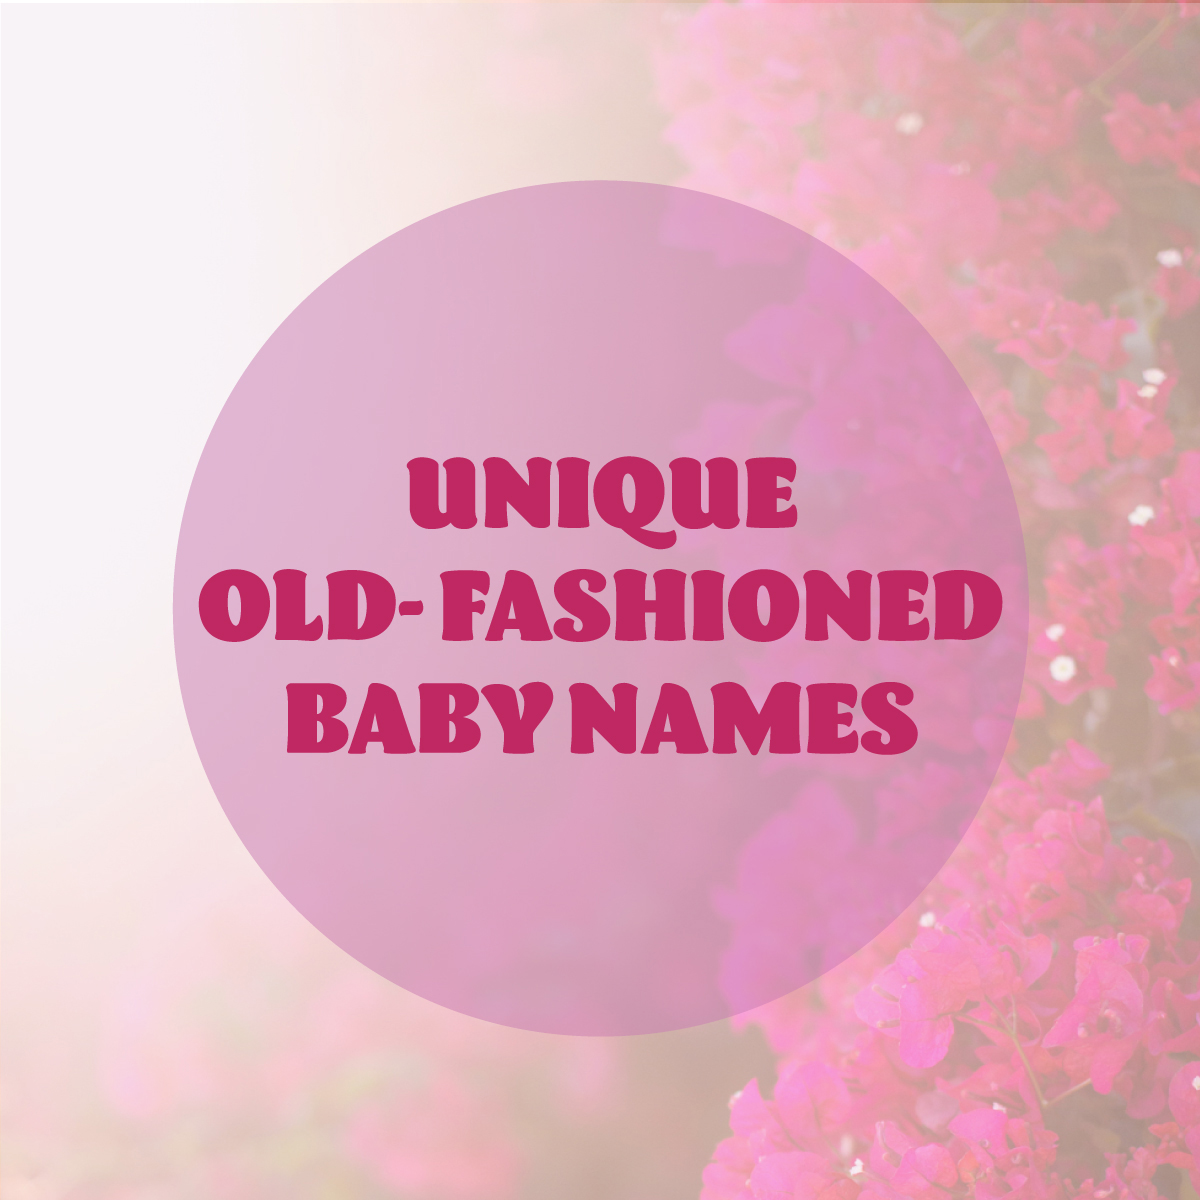 100 Old-Fashioned Girl Names